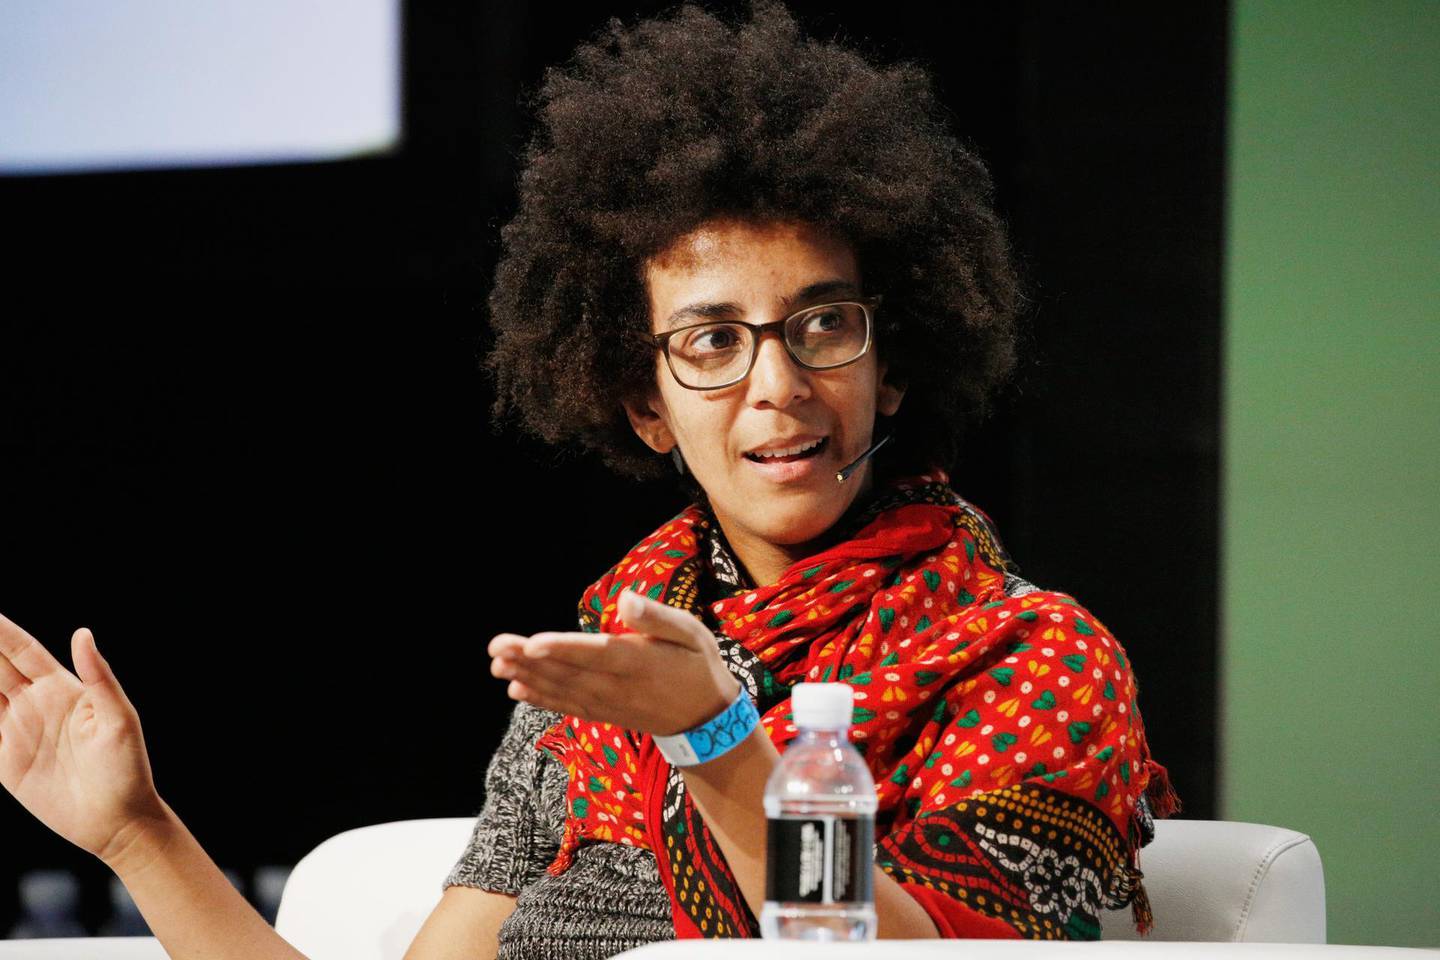 SAN FRANCISCO, CA - SEPTEMBER 07: Google AI Research Scientist Timnit Gebru speaks onstage during Day 3 of TechCrunch Disrupt SF 2018 at Moscone Center on September 7, 2018 in San Francisco, California.   Kimberly White/Getty Images for TechCrunch/AFP